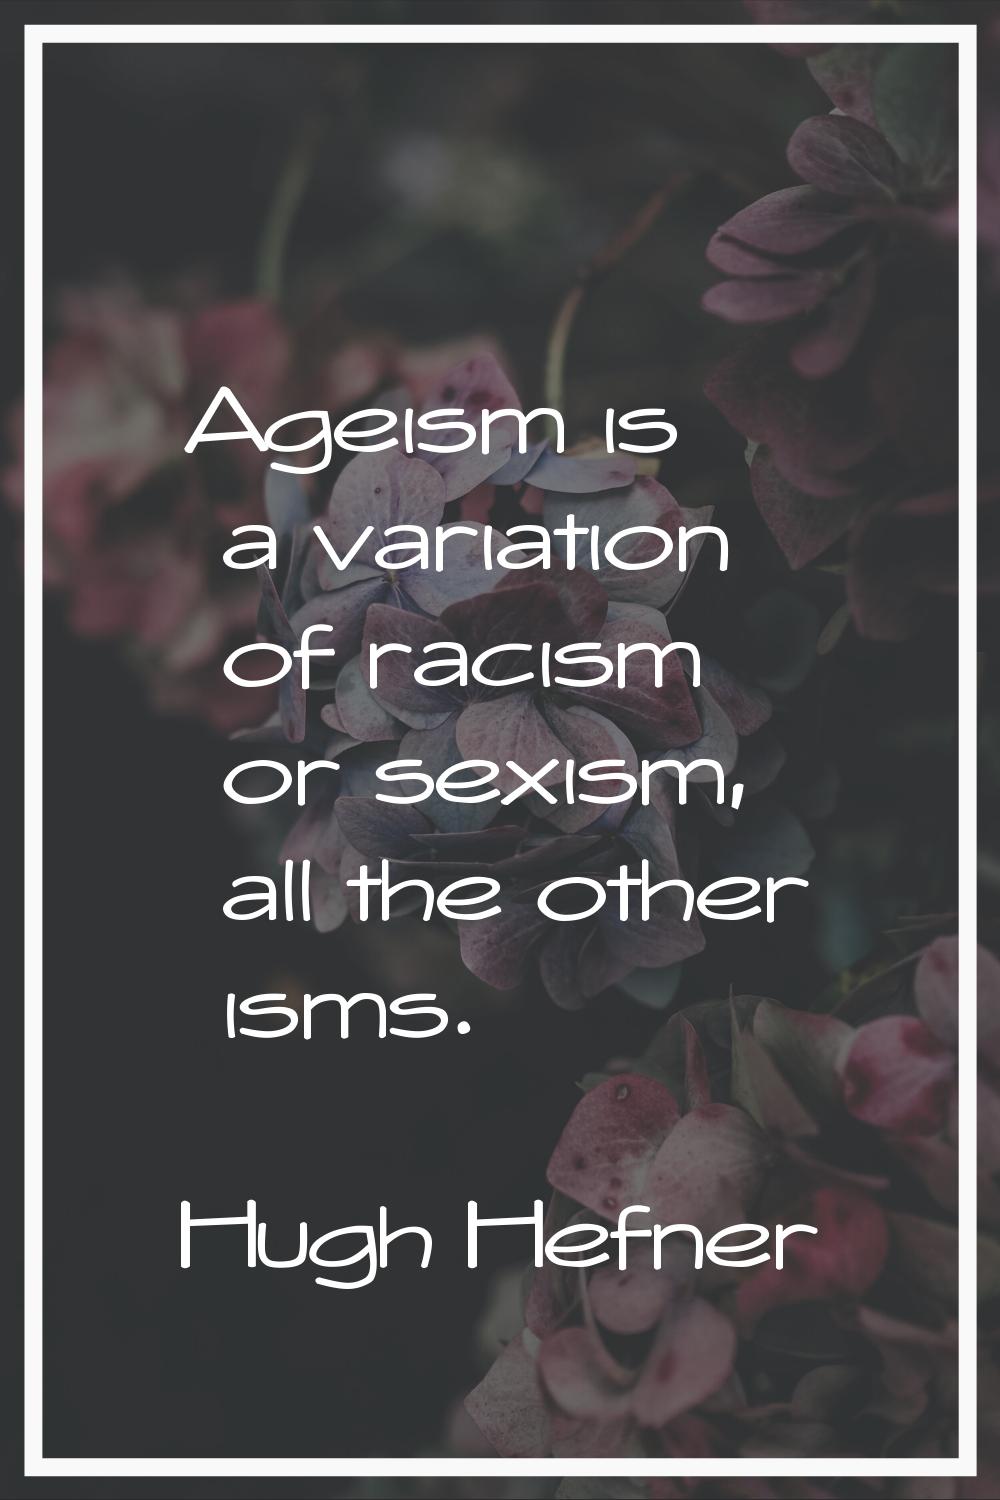 Ageism is a variation of racism or sexism, all the other isms.